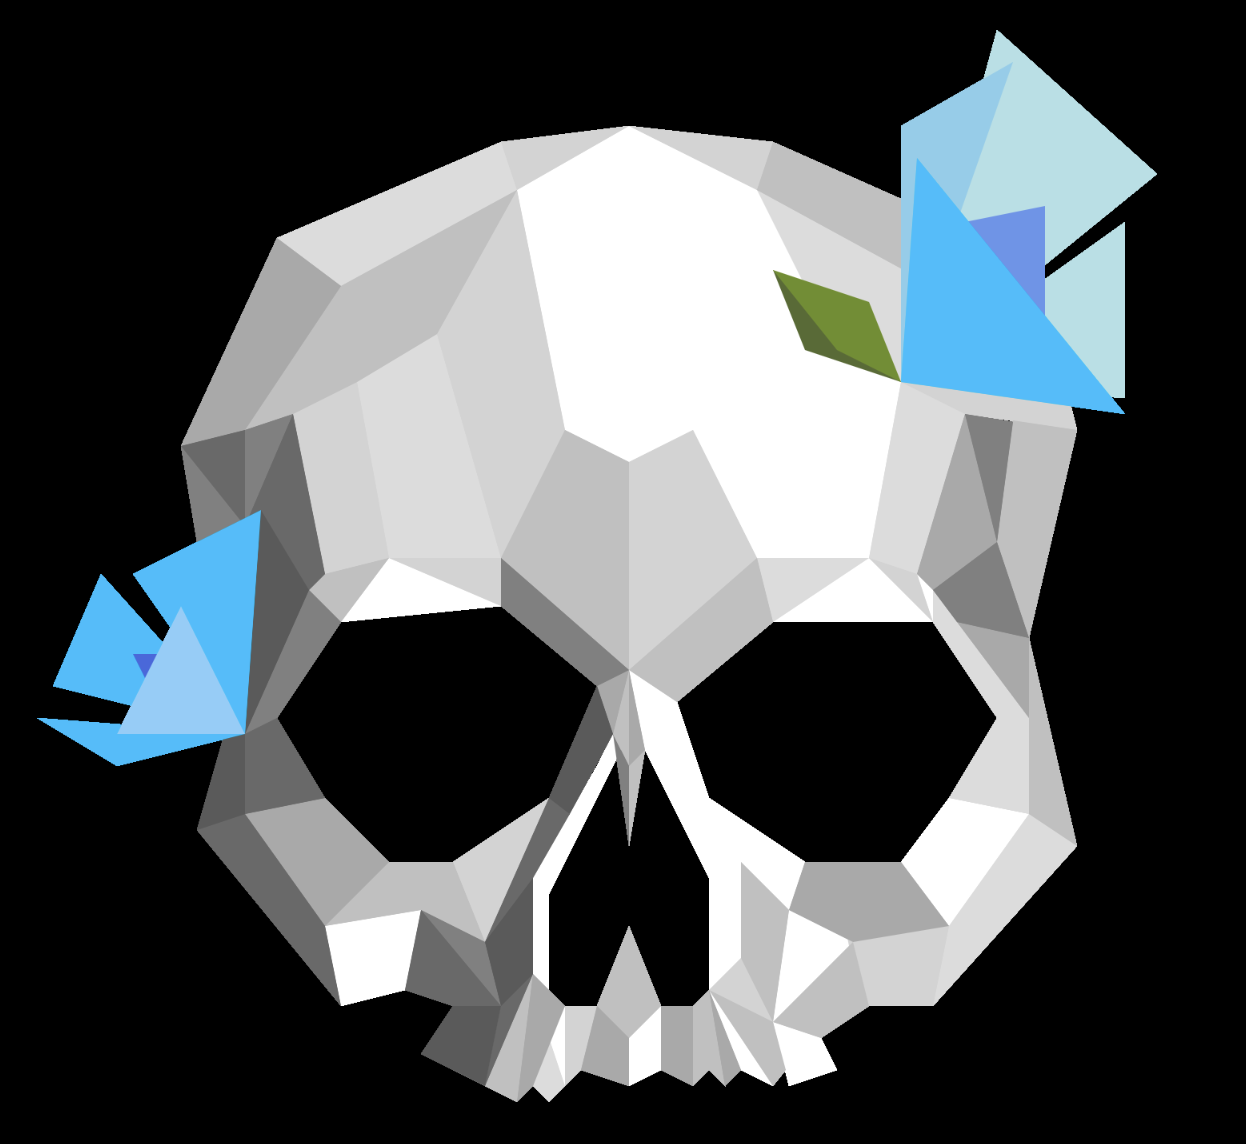 Skull made of white and gray shapes with two blue flowers, one on the cheek and one on the crown of the head, on a black background.